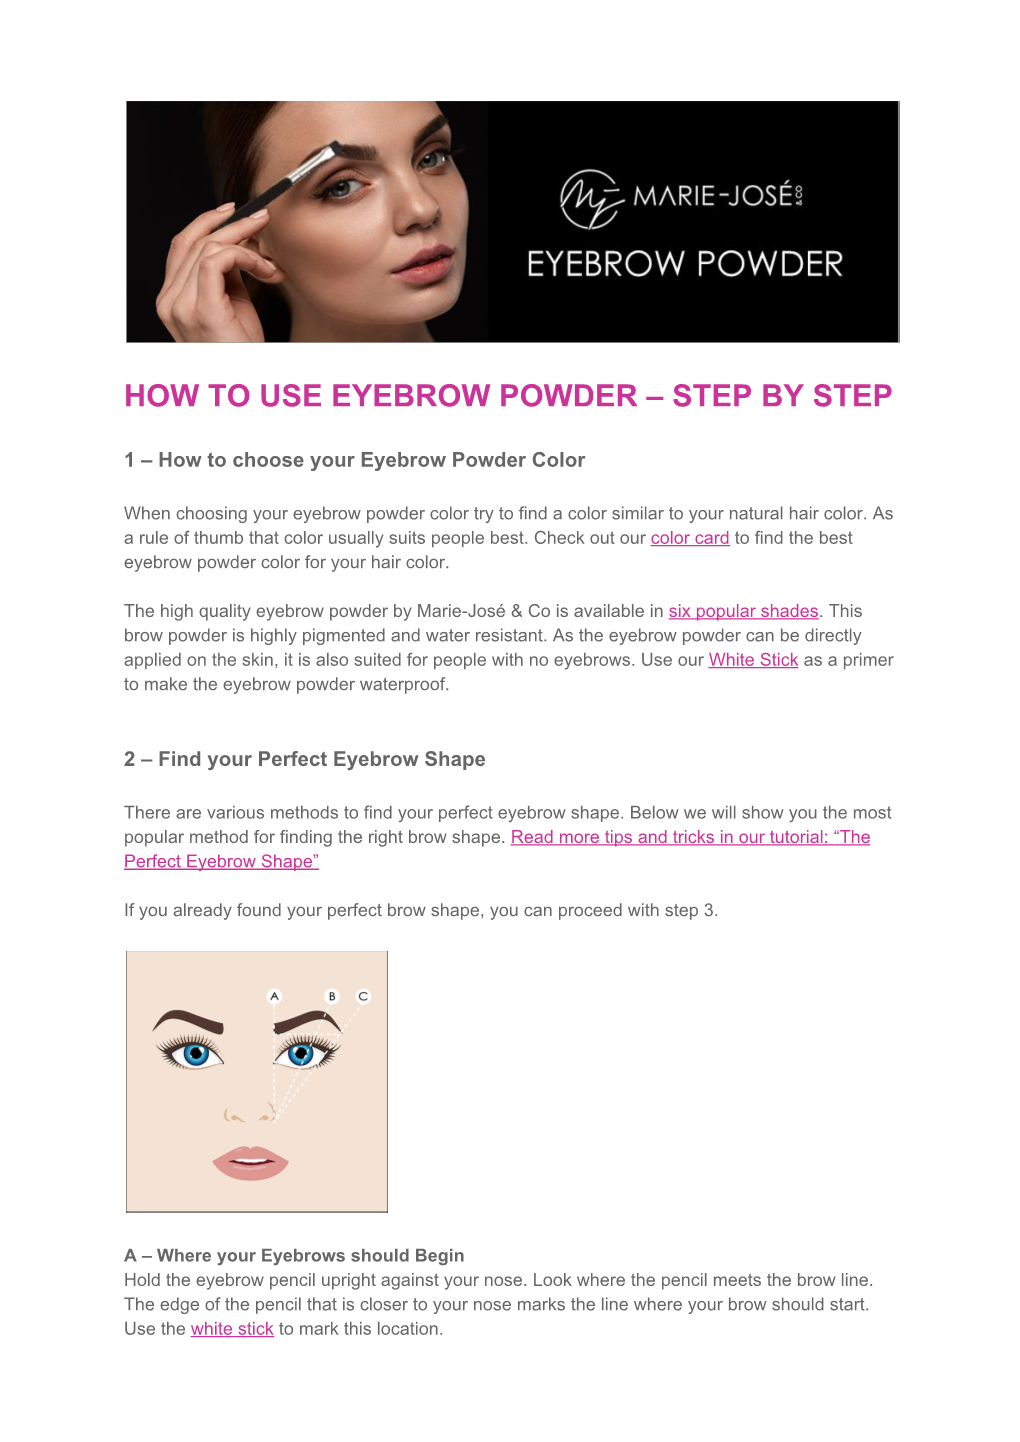 How to Use Eyebrow Powder – Step by Step